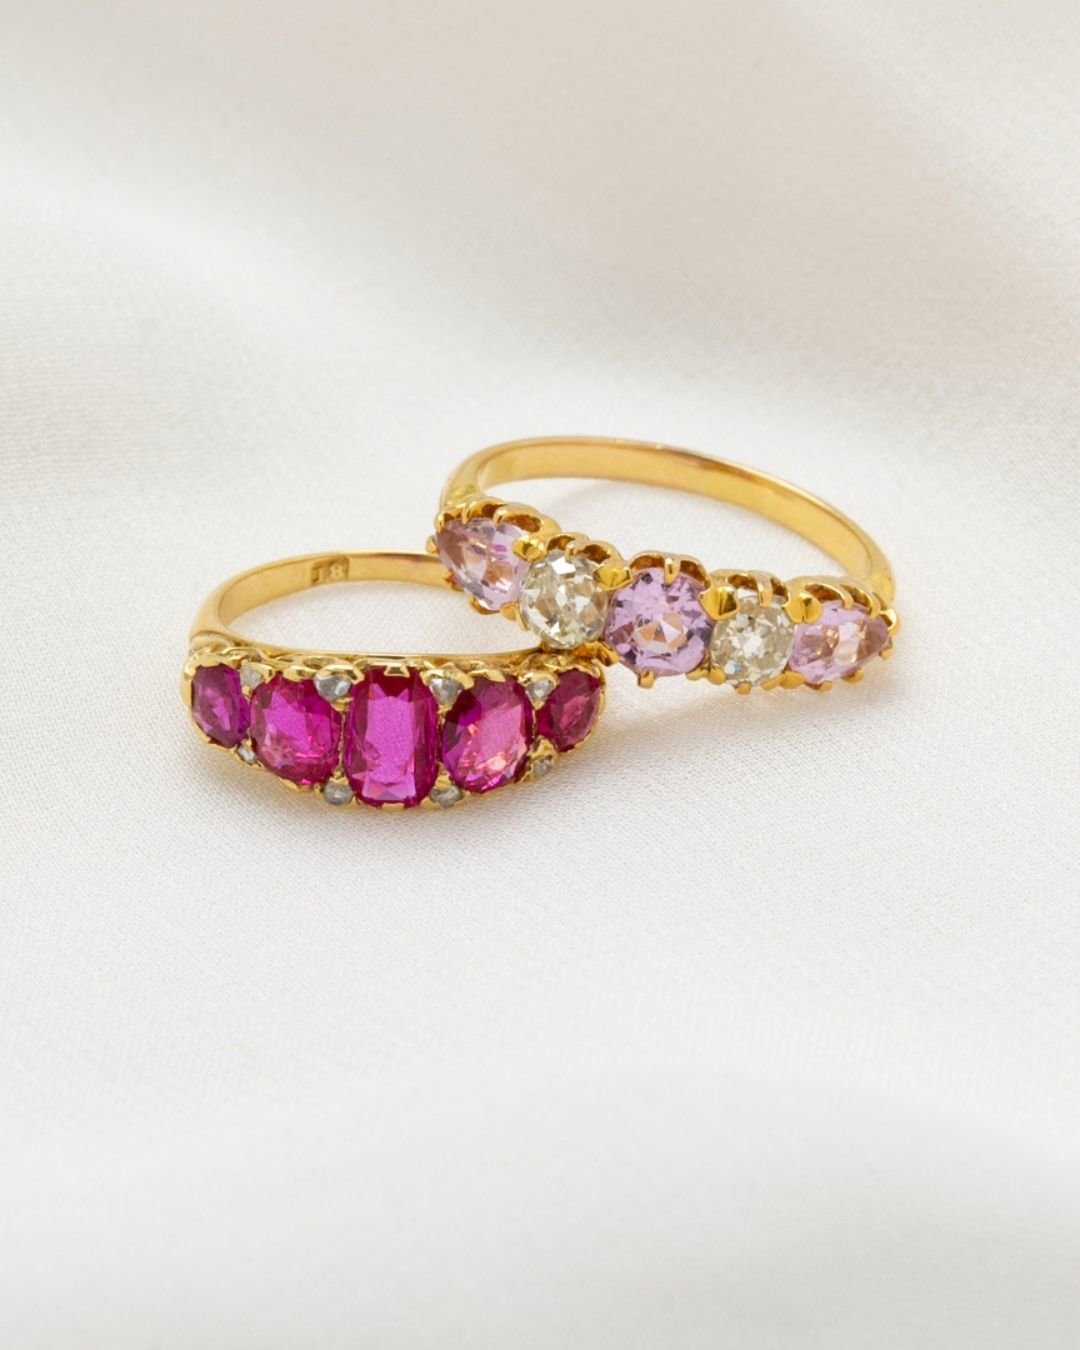 ruby engagement rings with amazing details2